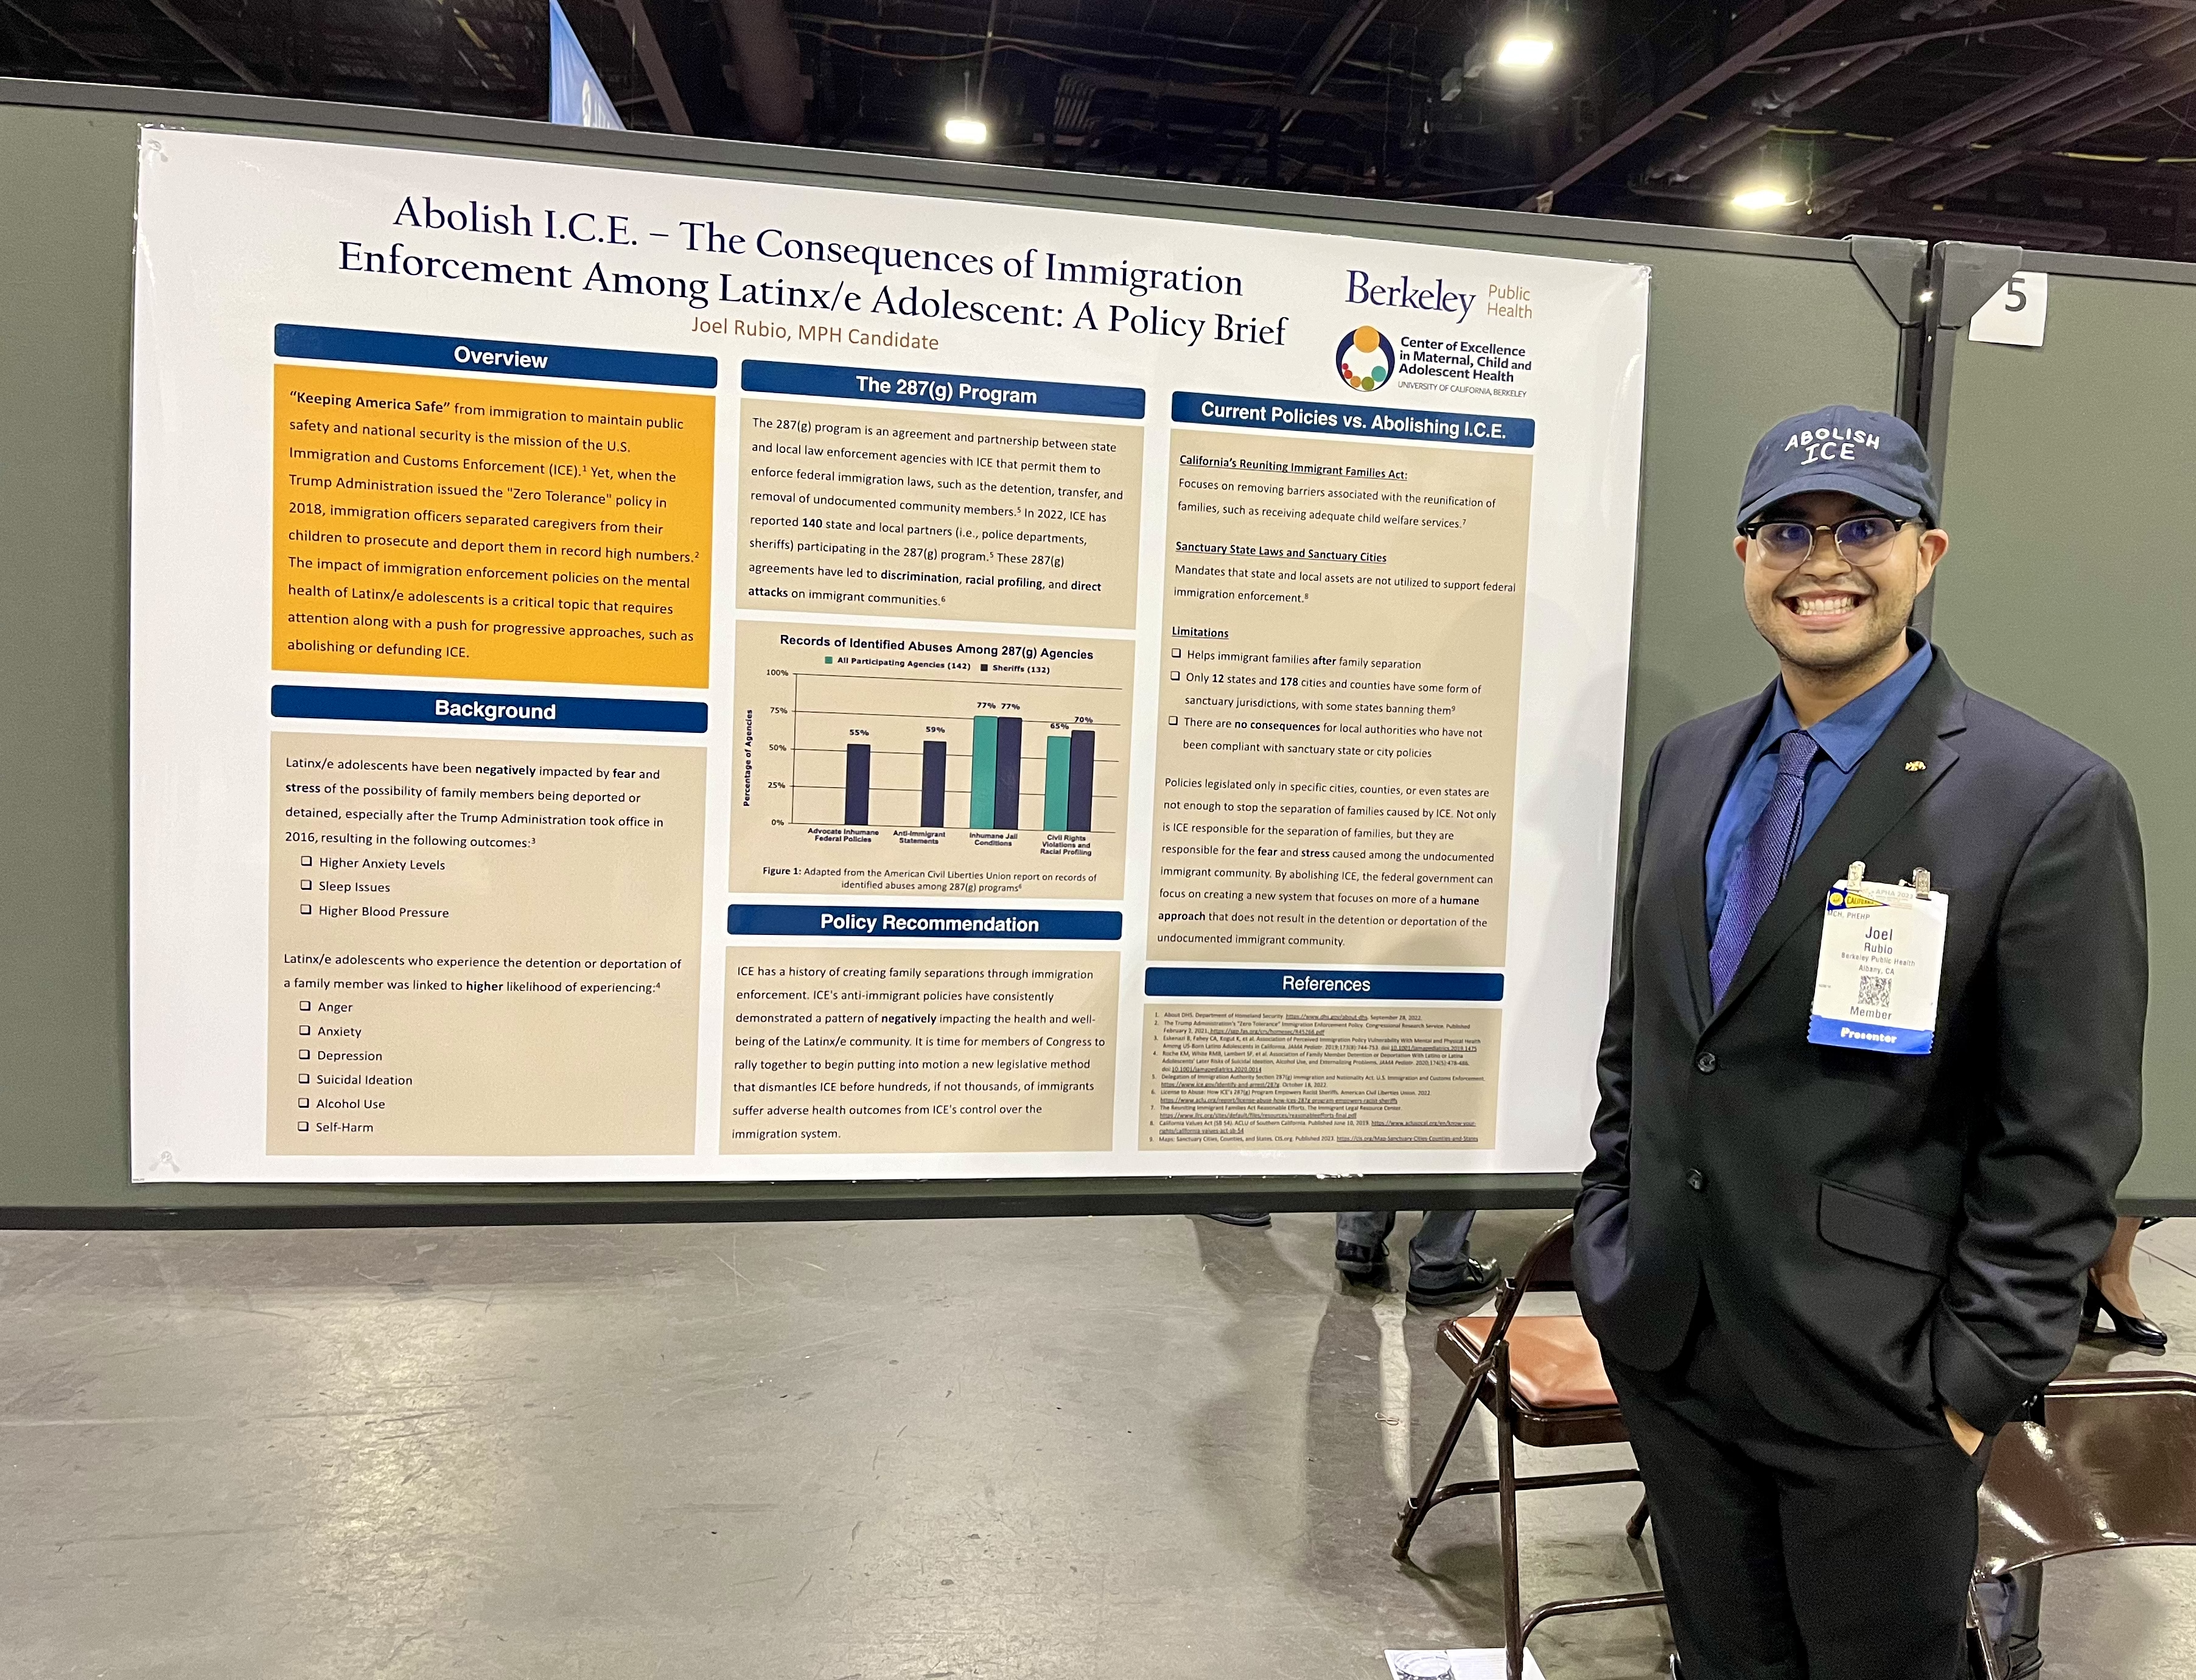 Joel Rubio standing next to his poster presentation titled "Abolish I.C.E. - The Consequences of Immigration Enforcement Among Latinx/e Adolescents," focusing on the importance of family separation and the impact of anti-immigrant rhetoric policies.